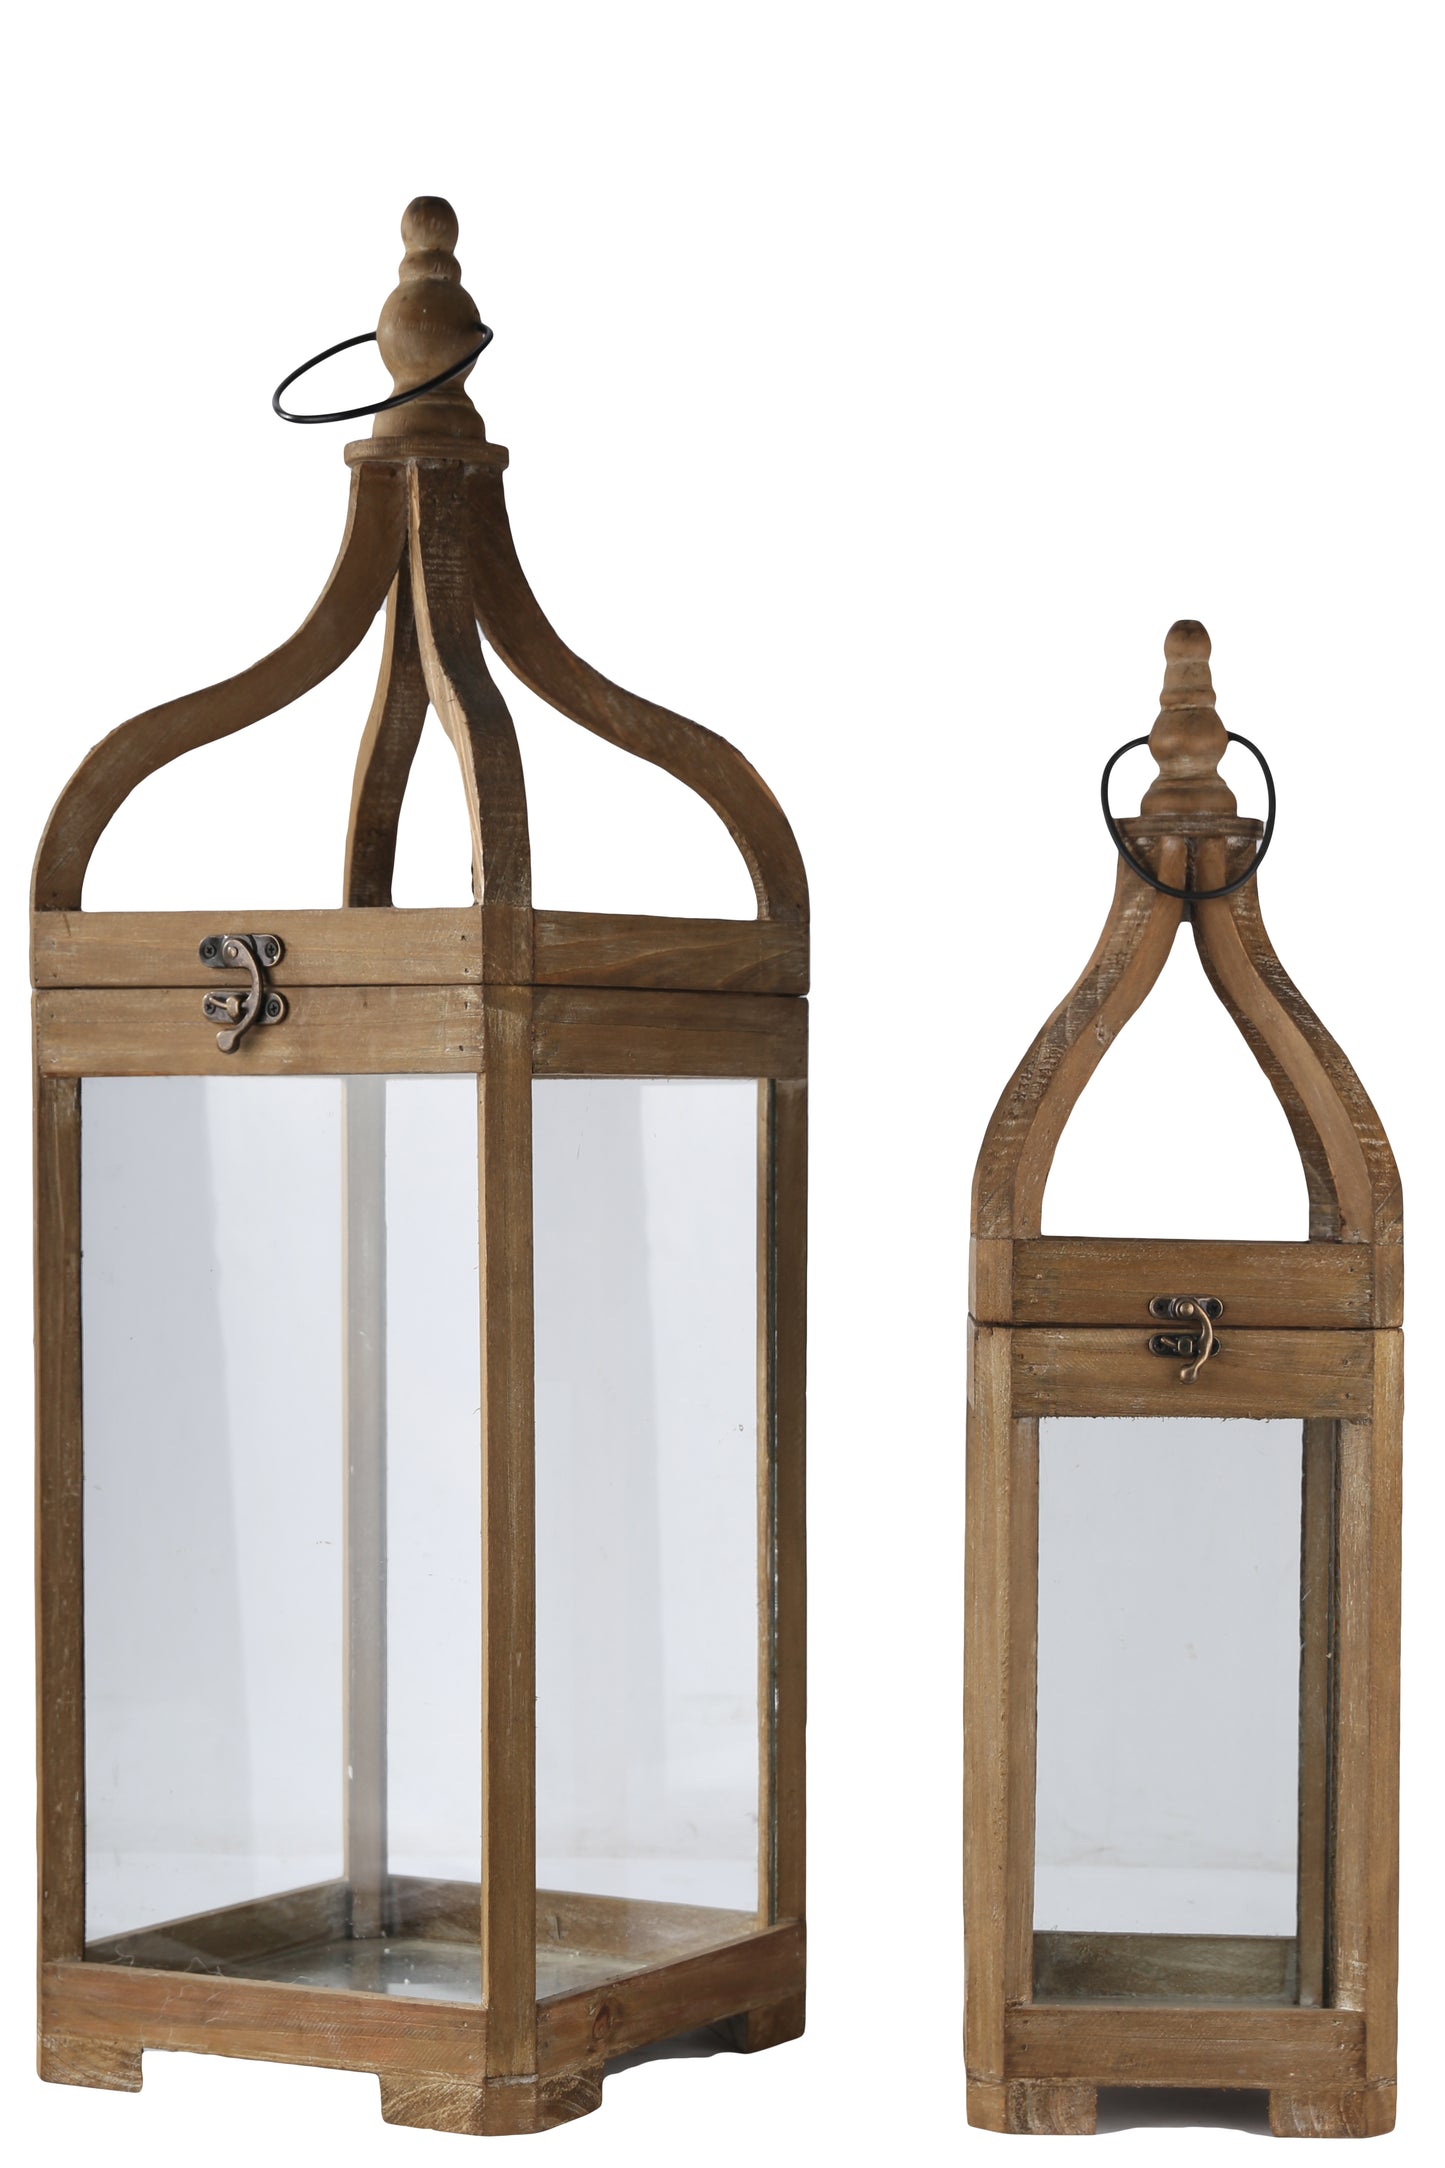 Wood Square Lantern with Top Metal Ring Hanger and Glass Sides